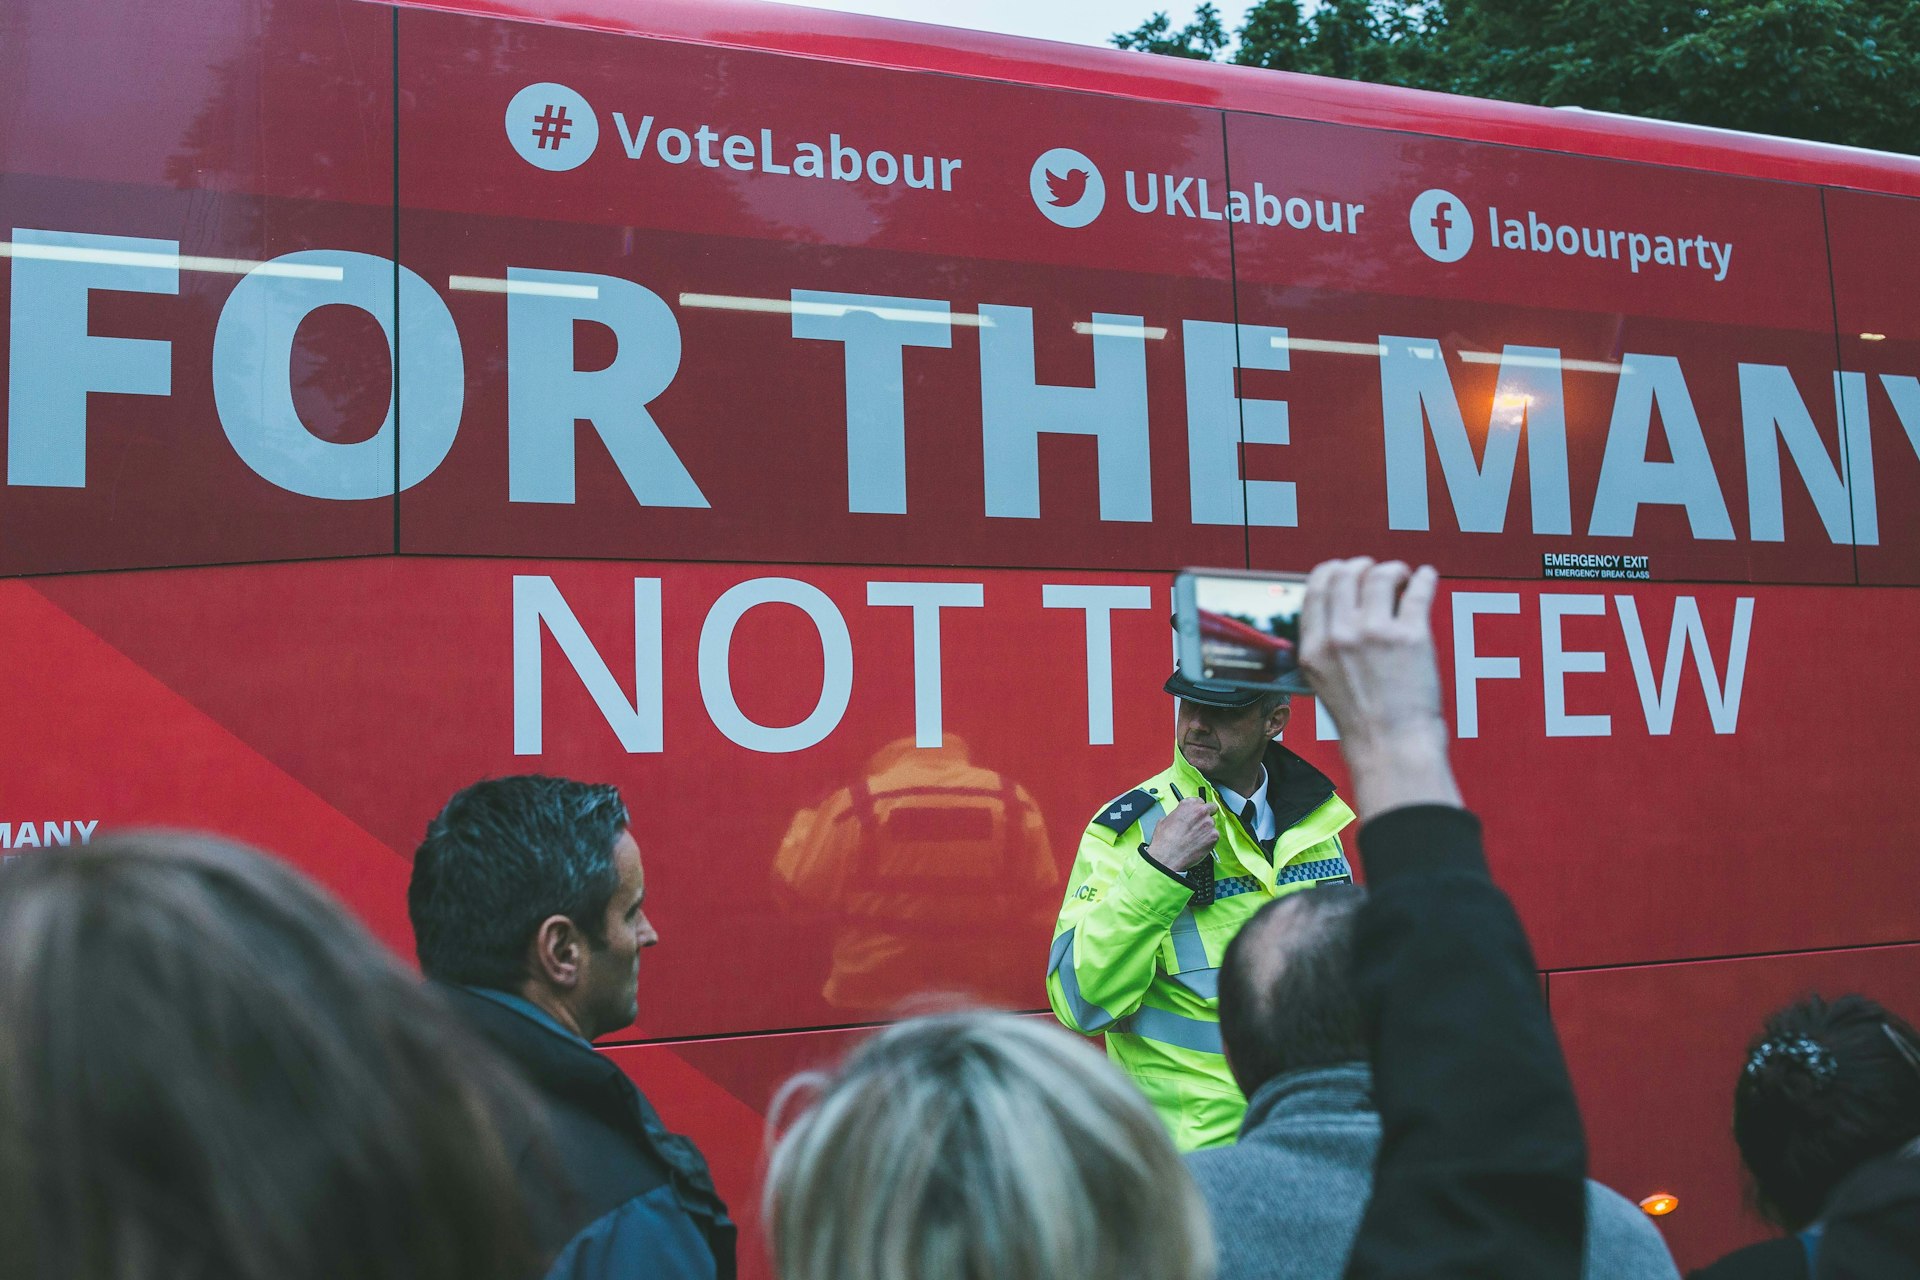 Labour pledge to introduce free bus travel for under-25s